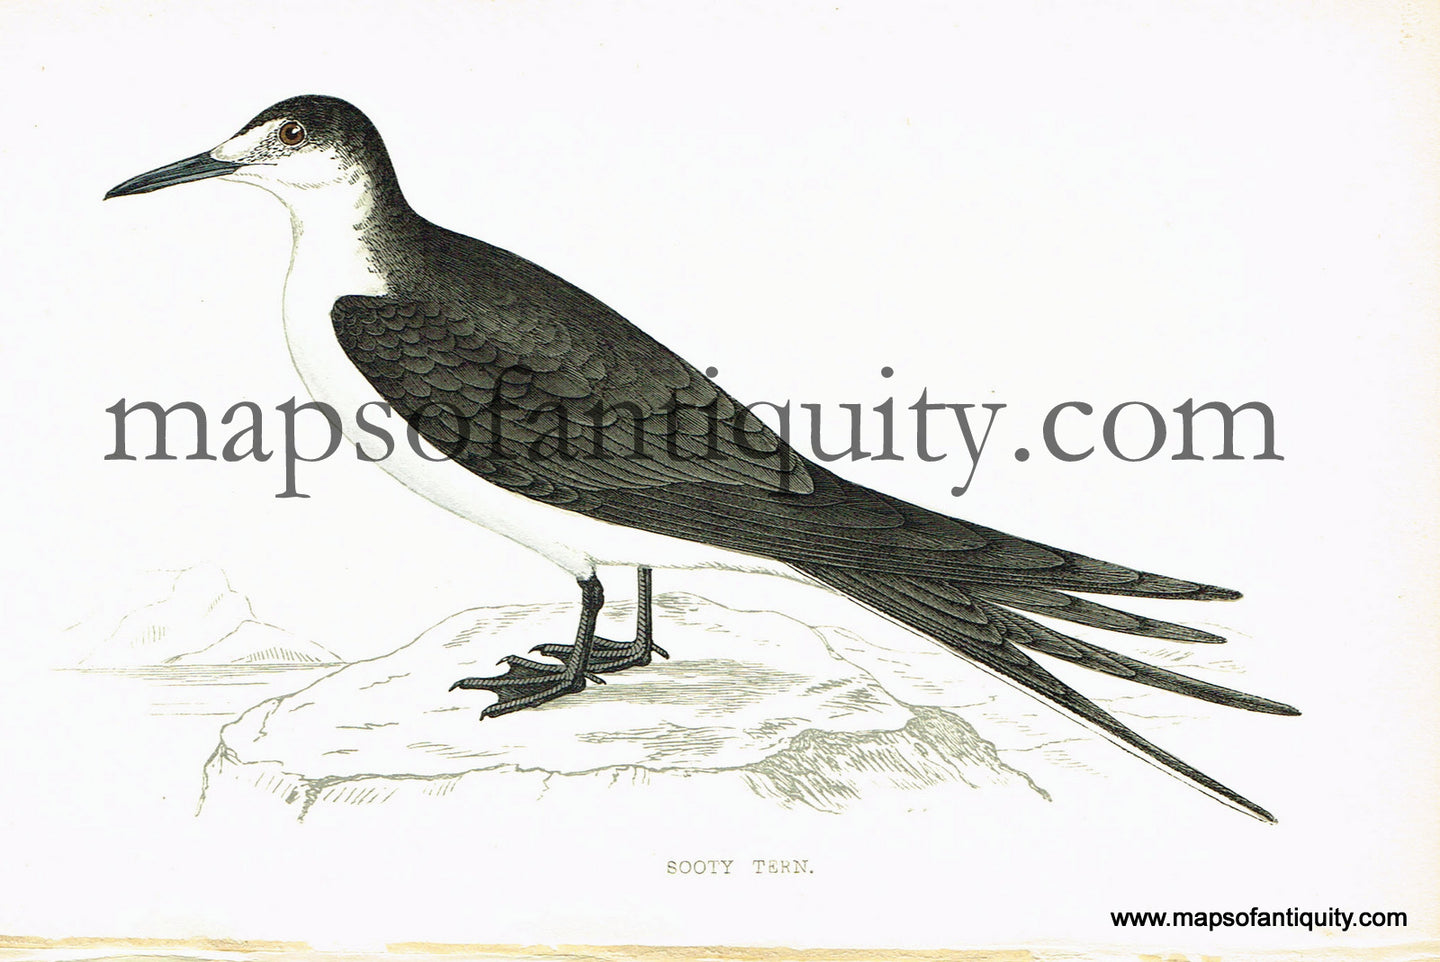 Antique-Hand-Colored-Engraved-Illustration-Sooty-Tern-Antique-Prints-Natural-History-Birds-1867-Morris-Maps-Of-Antiquity